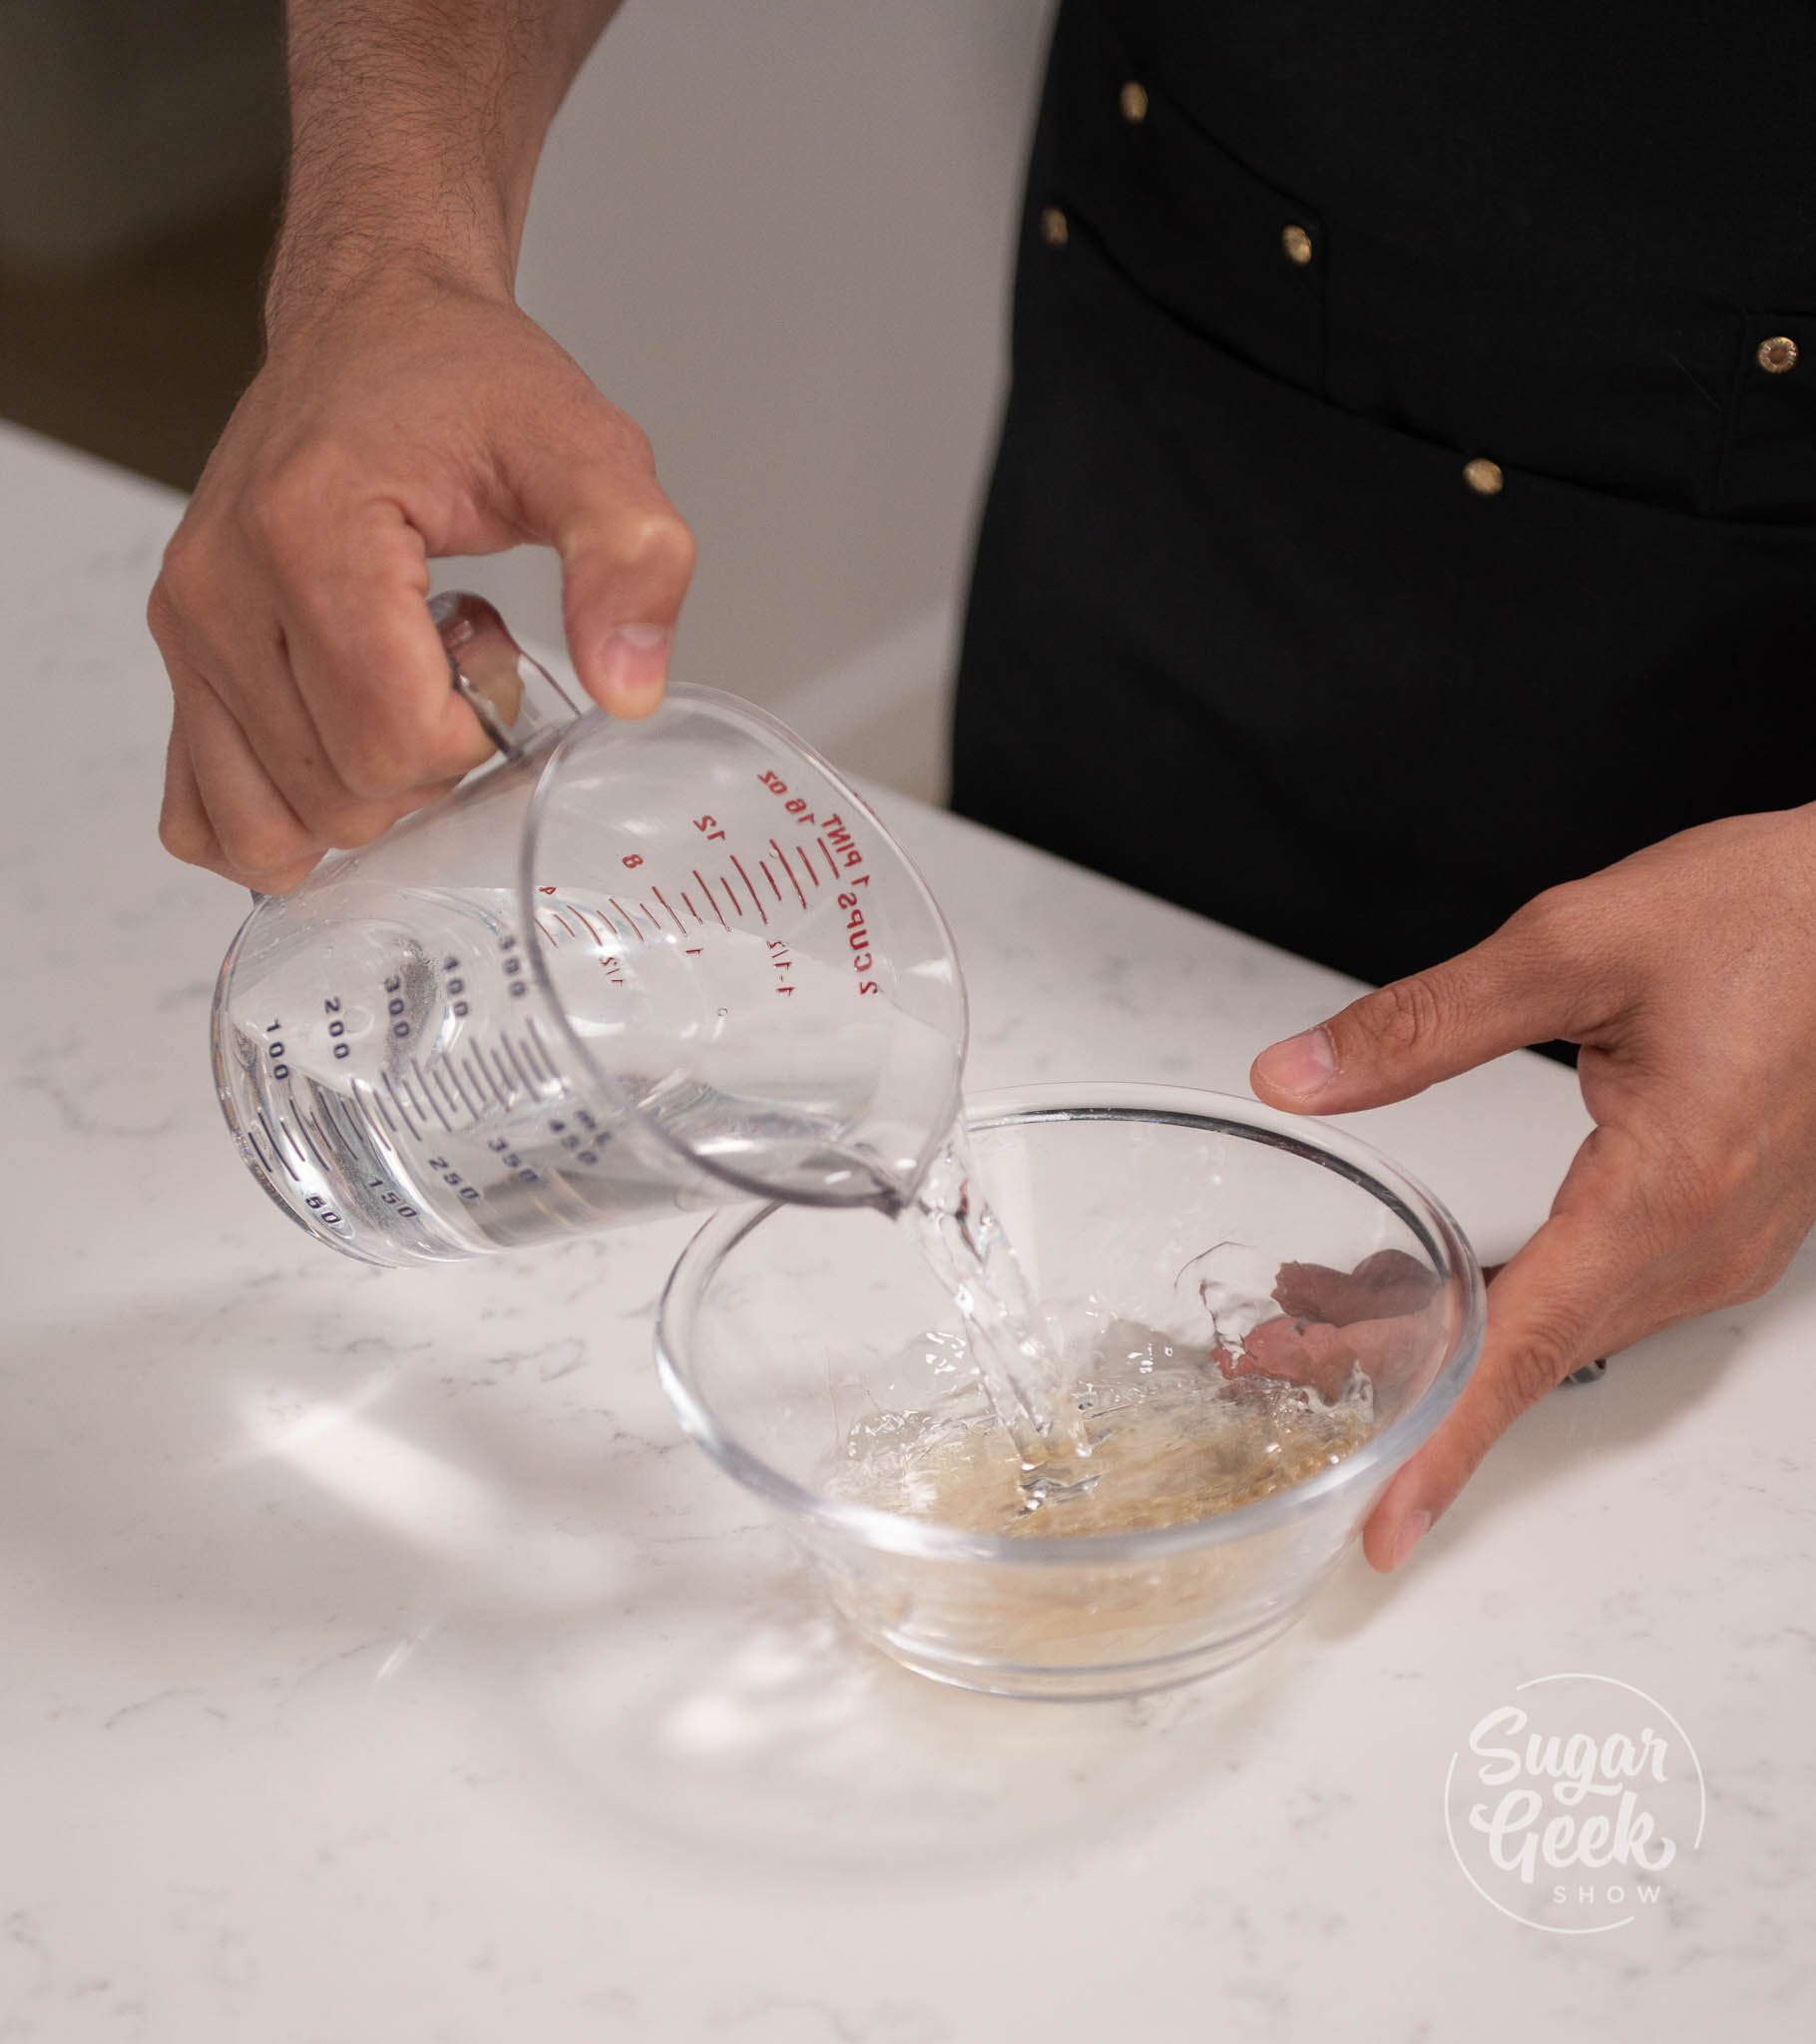 hand pouring measuring cup of water onto gelatin.